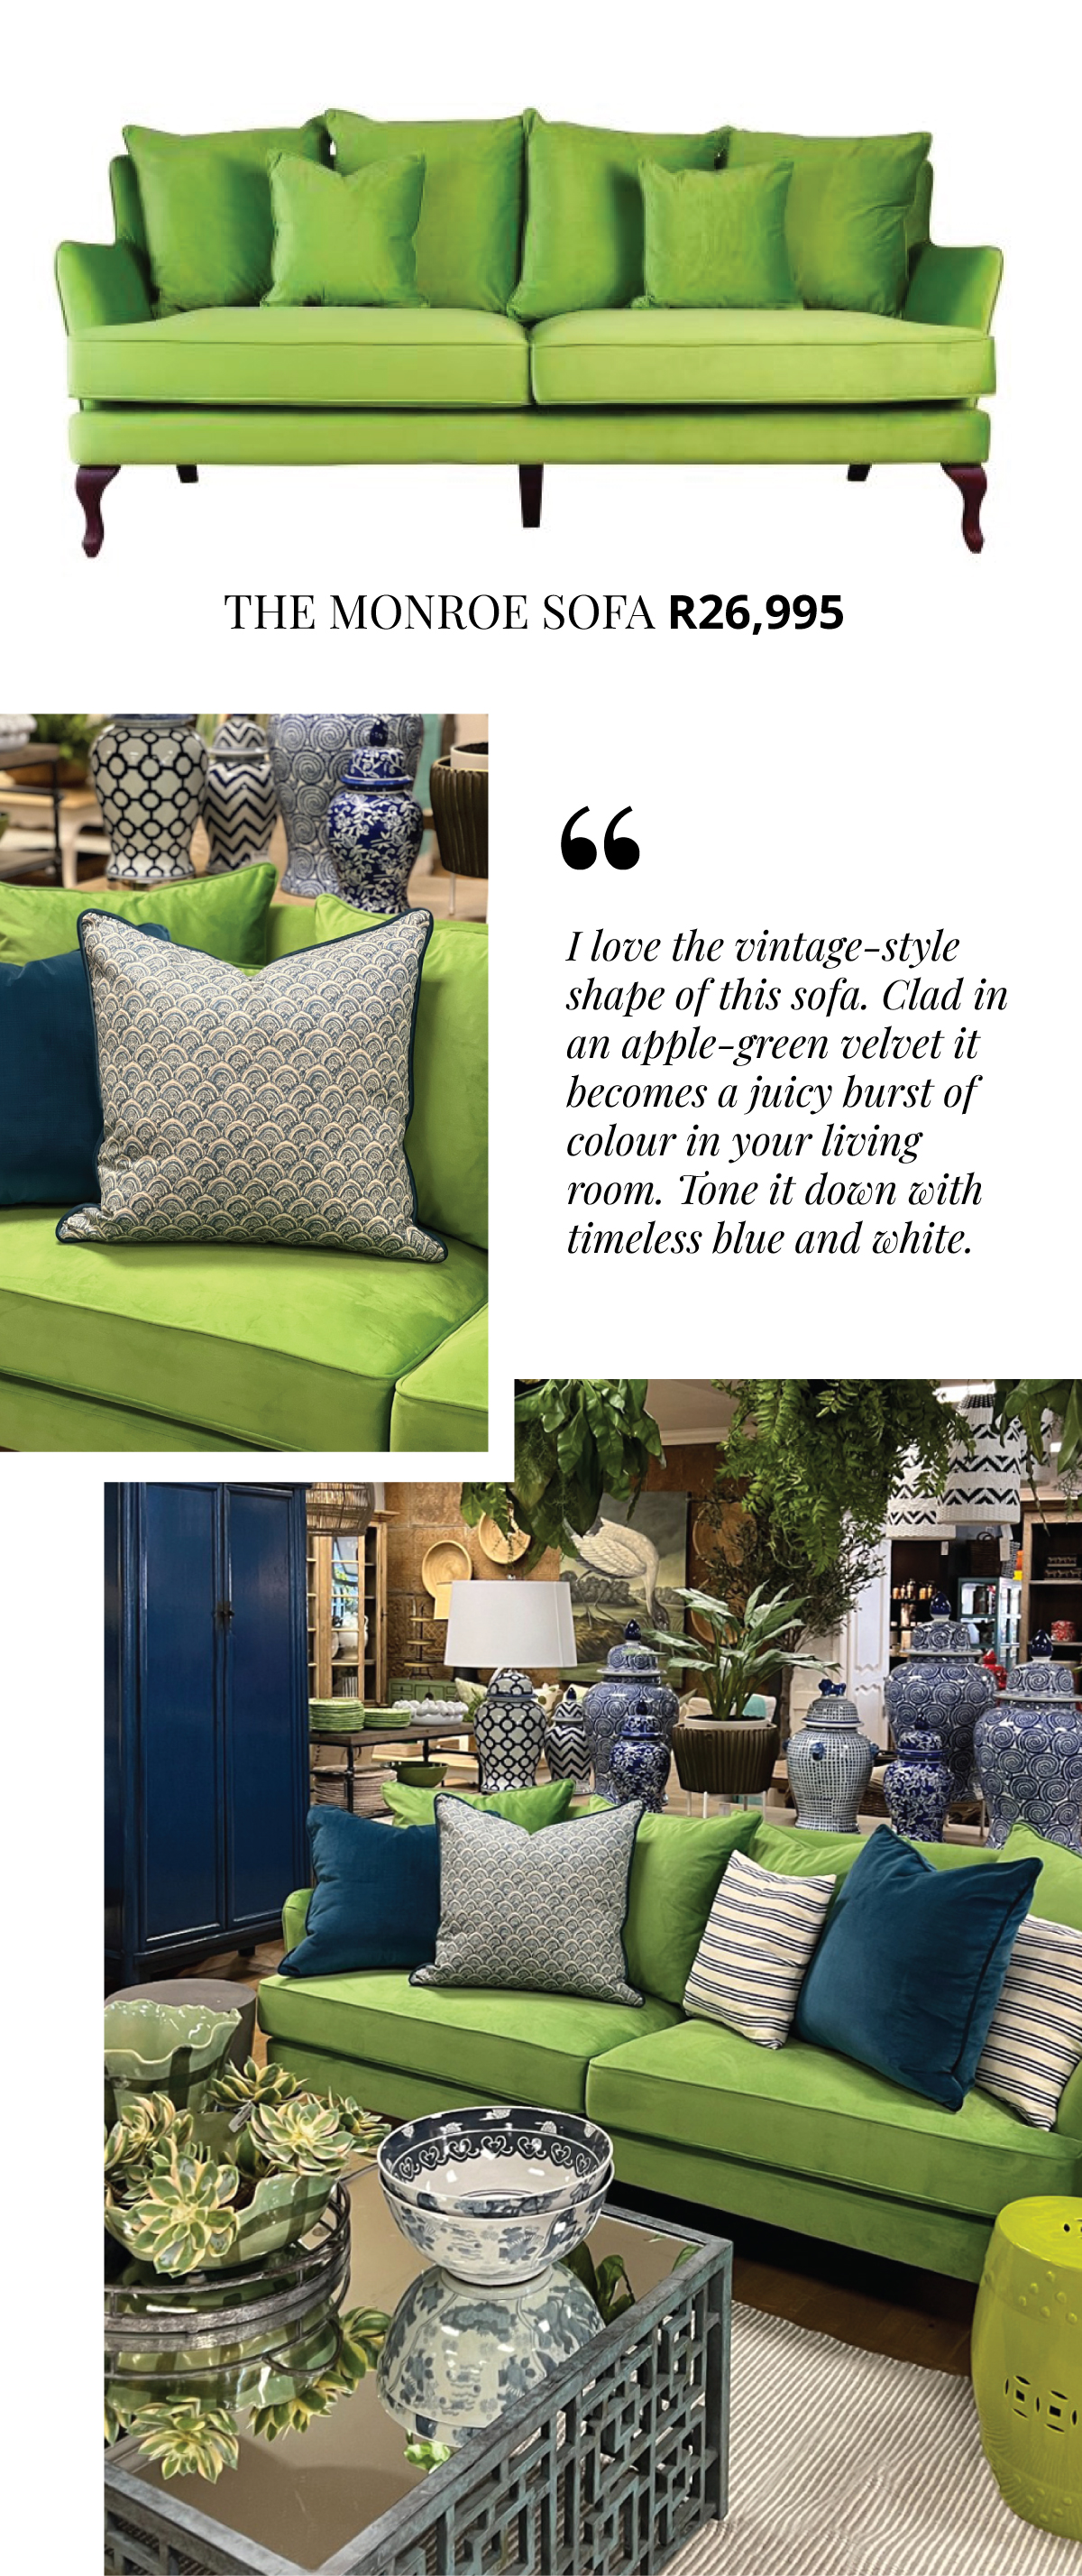 I love the vintage-style shape of this sofa. Clad in an apple-green velvet it becomes a juicy burst of colour in your living room. Tone it down with timeless blue and white. 